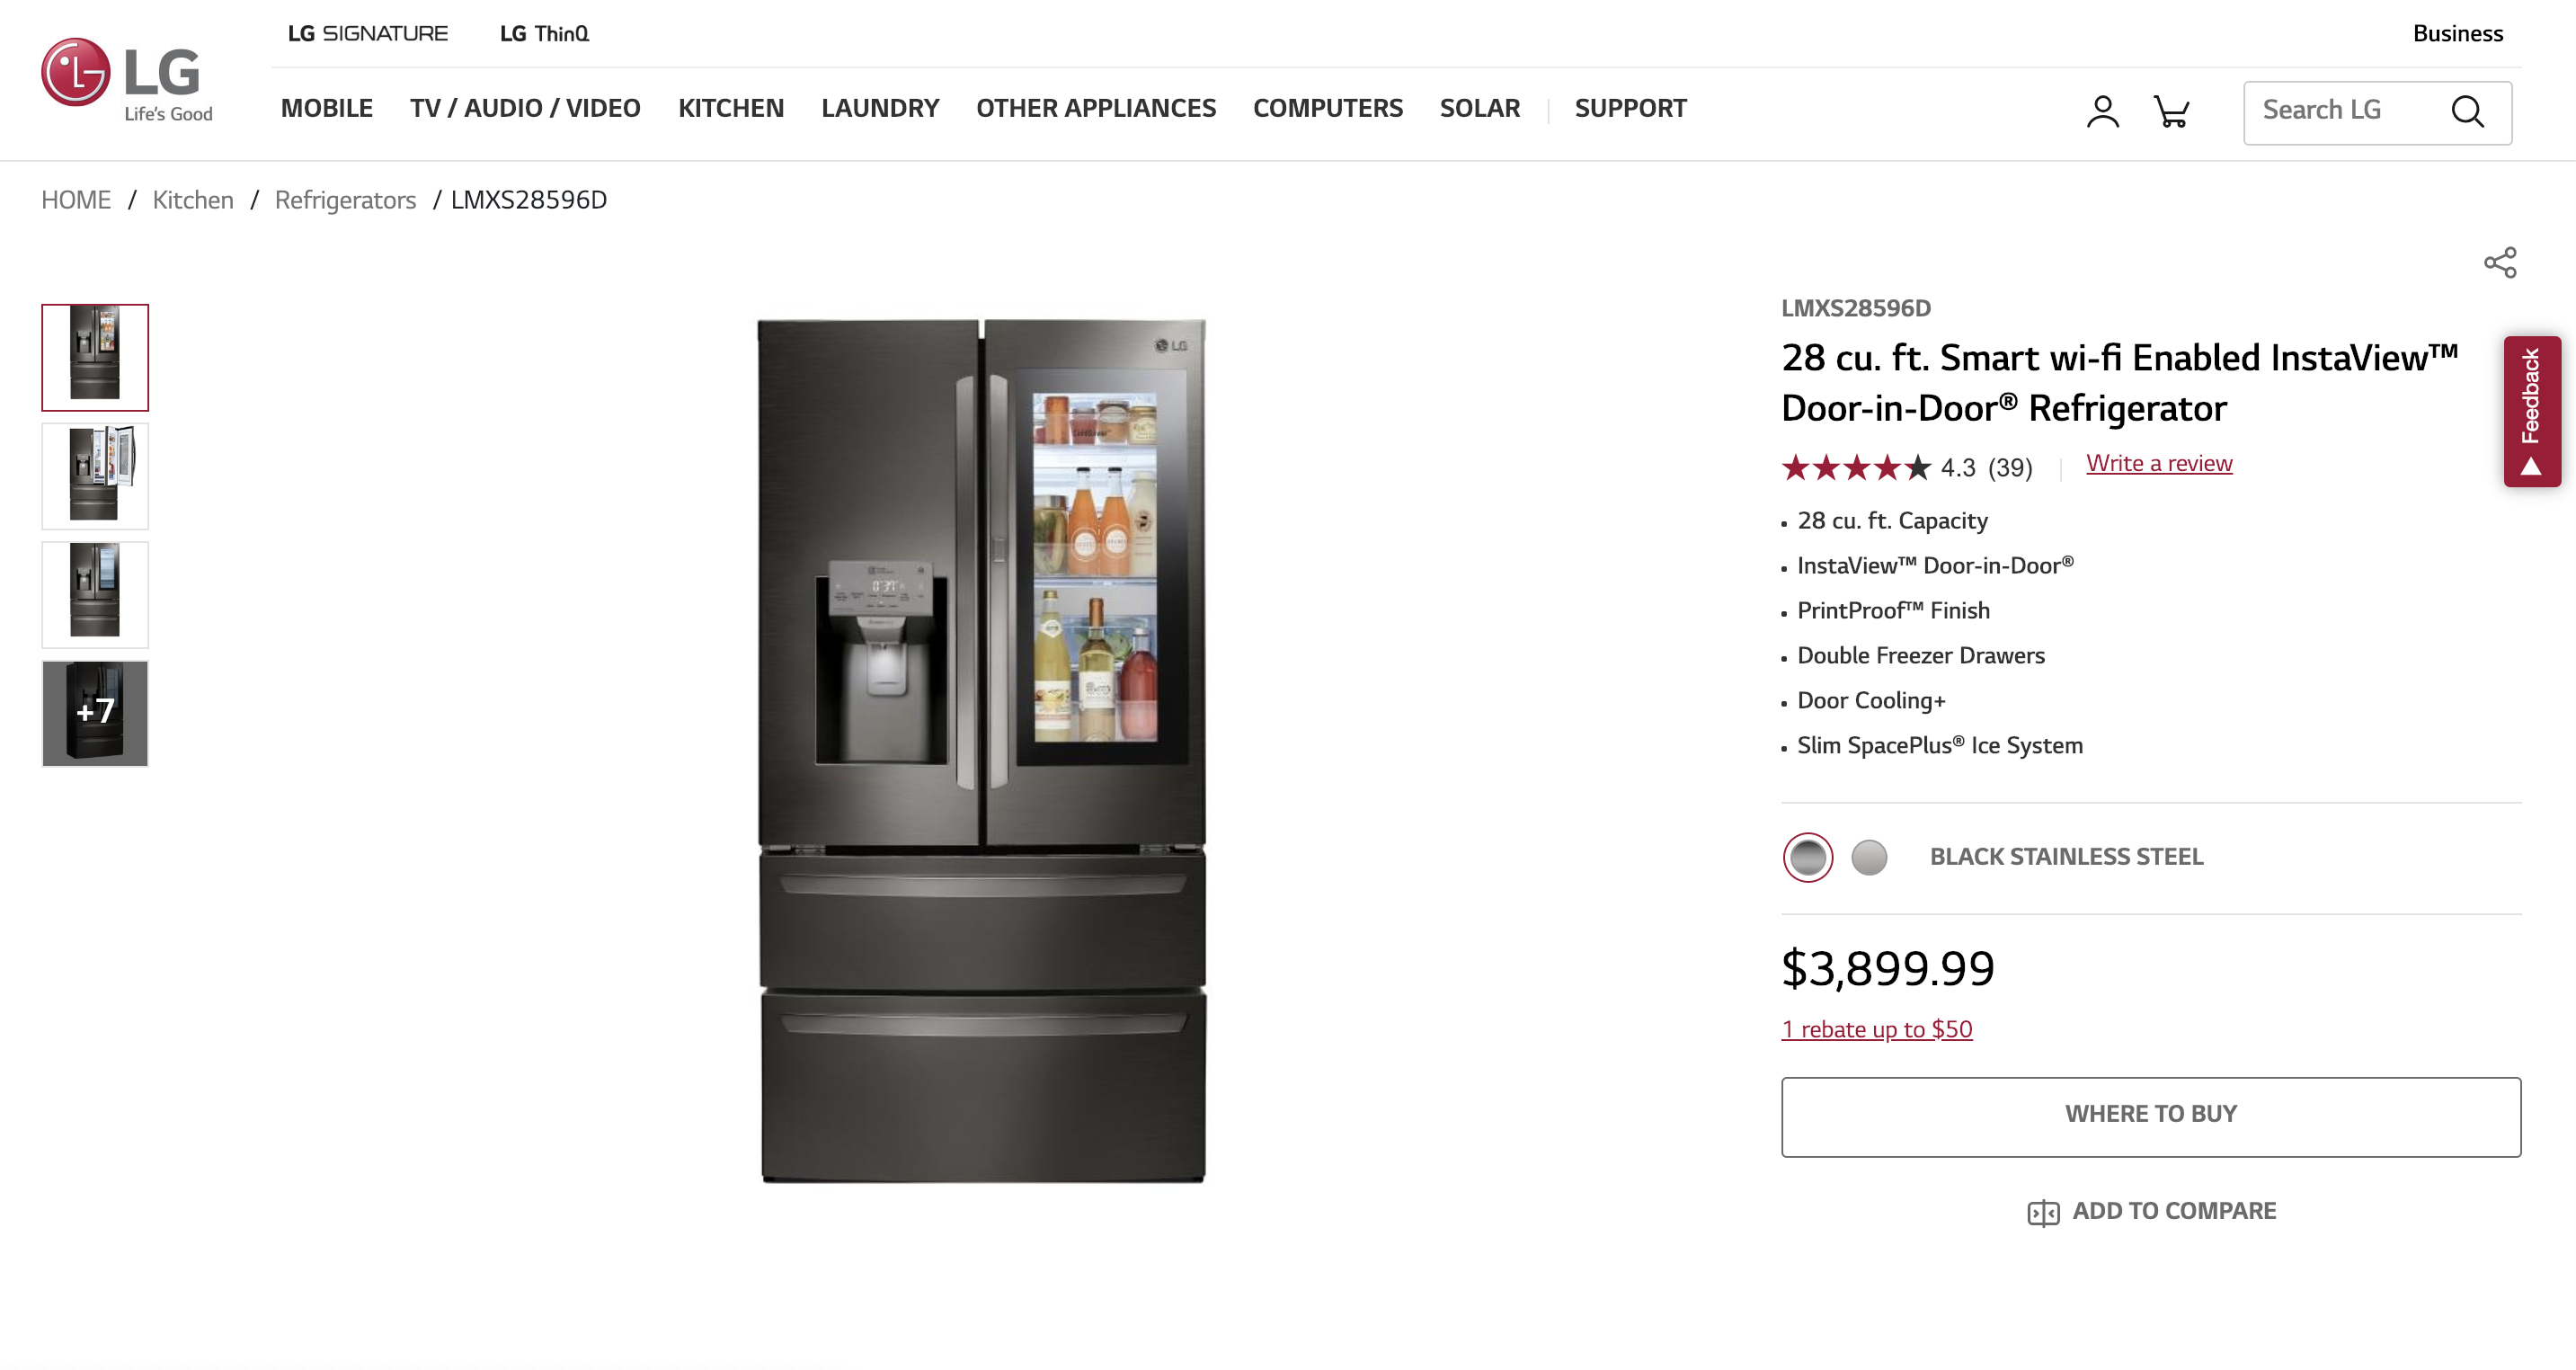 LG-smart-refrigerator-product-detail-page